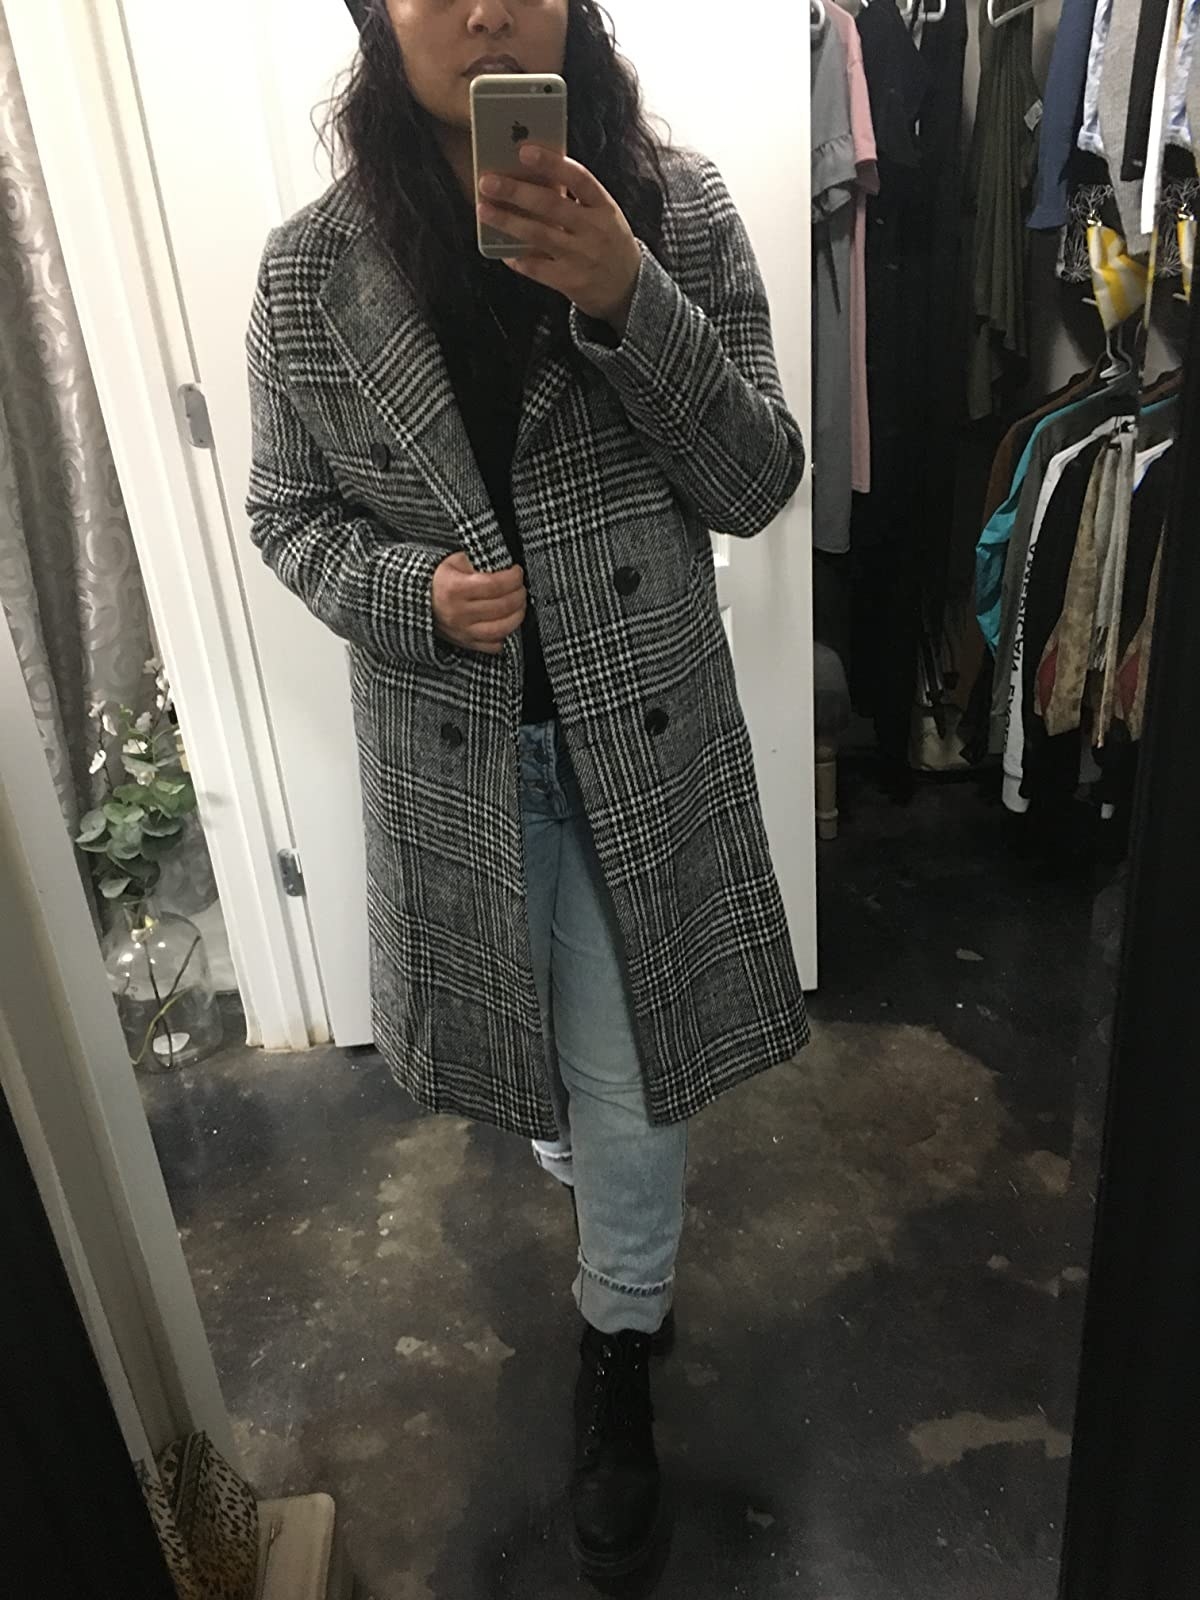 The coat worn by an Amazon reviewer taking a mirror selfie